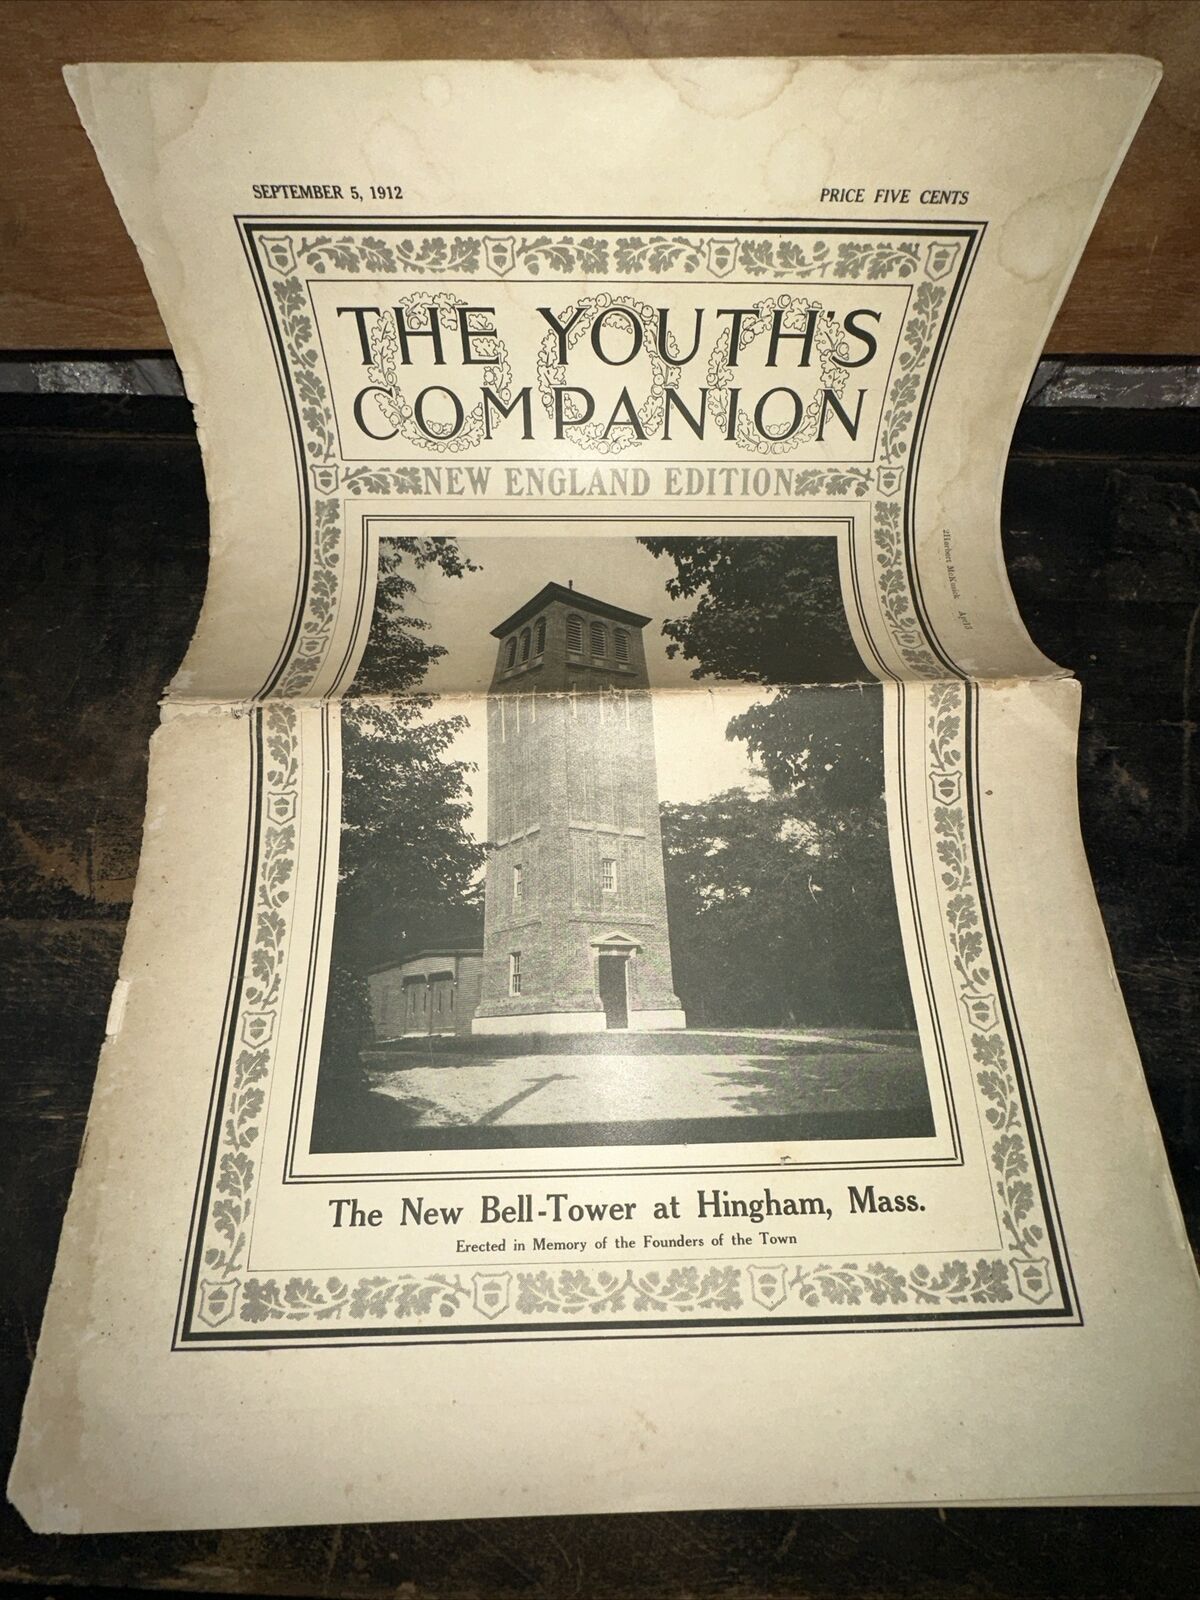 The Youth\'s Companion Magazine “ New England Edition” September 5, 1912 Issue.